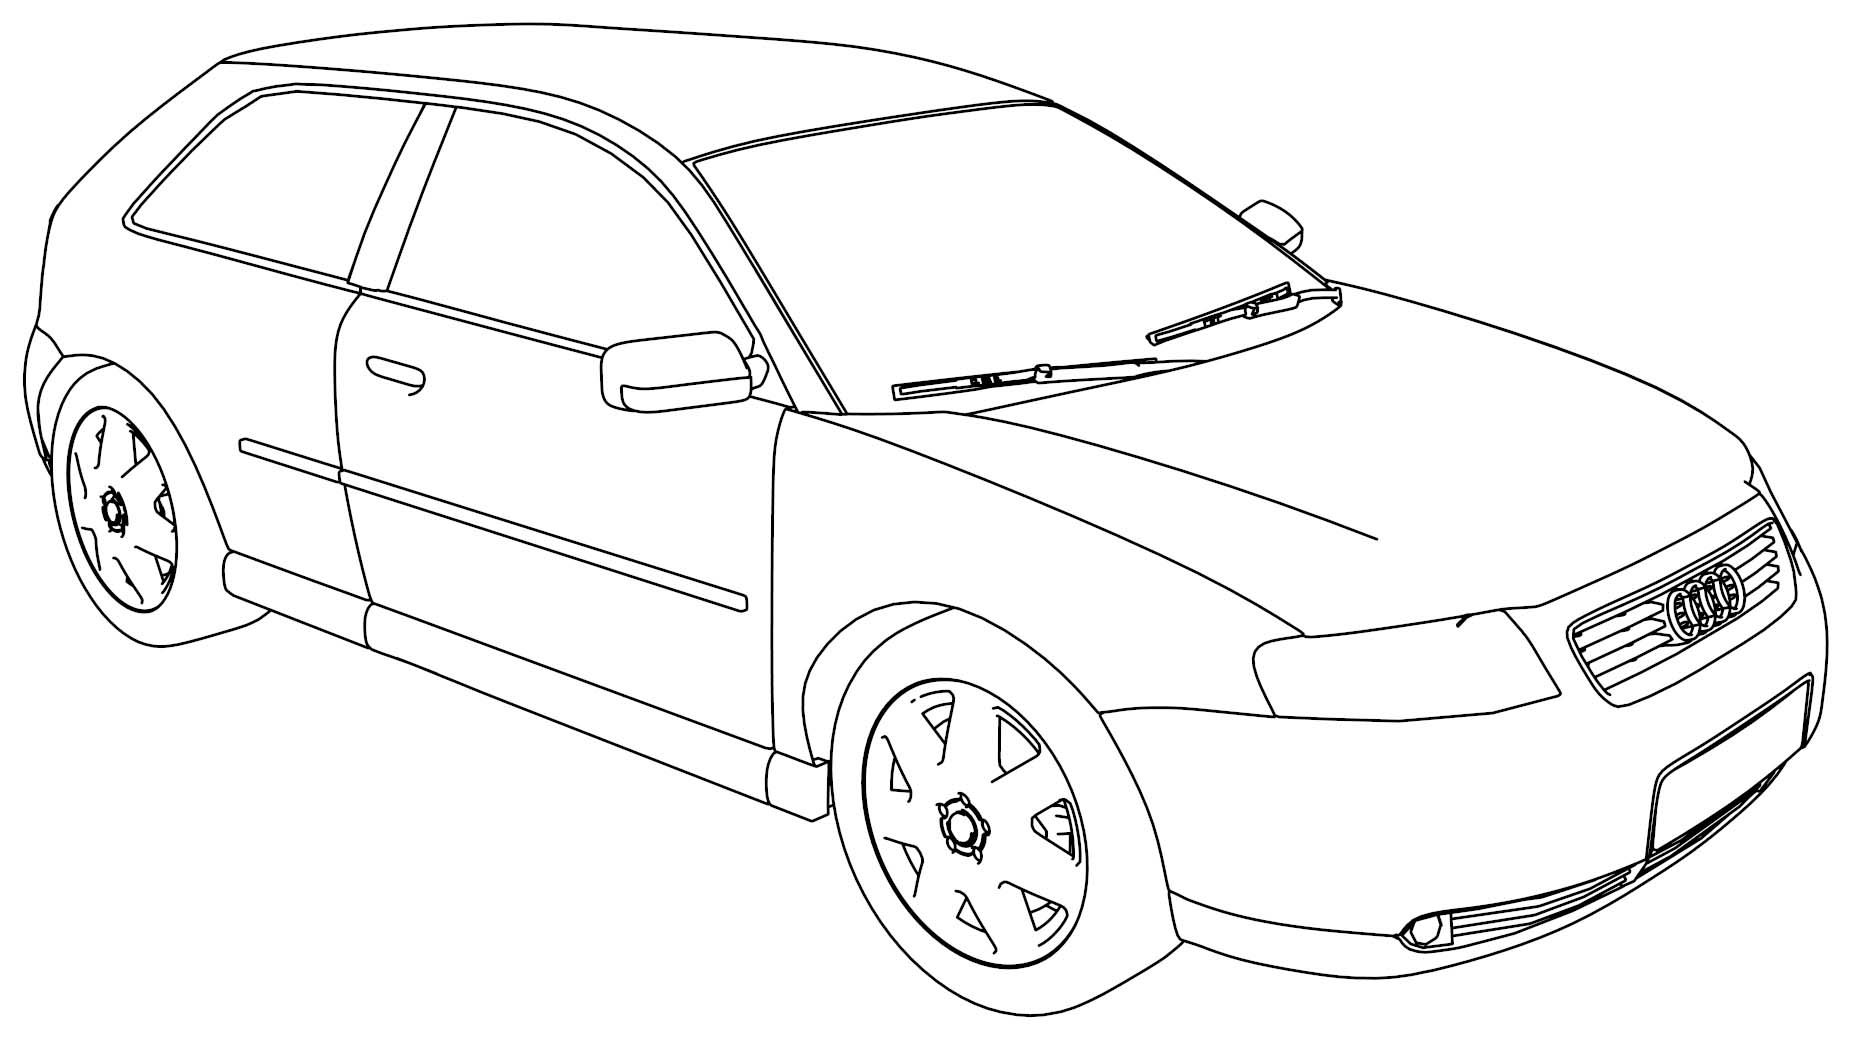 Awesome Audi A20 Coloring Page   Audi A20, Coloring Pages, Audi ...